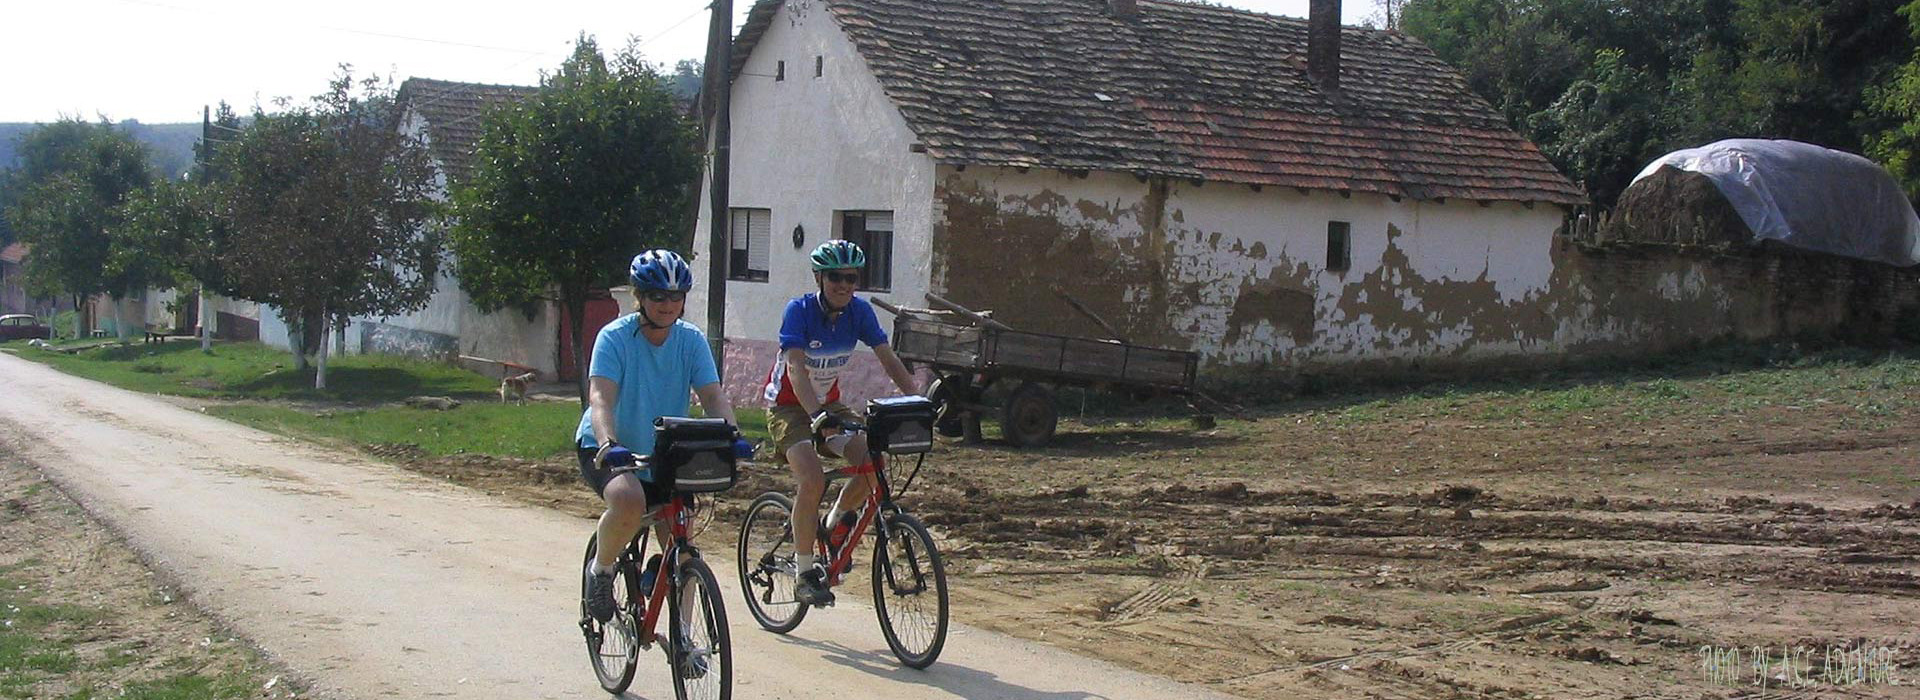 Danube Guided Cycling Holiday - Local villages